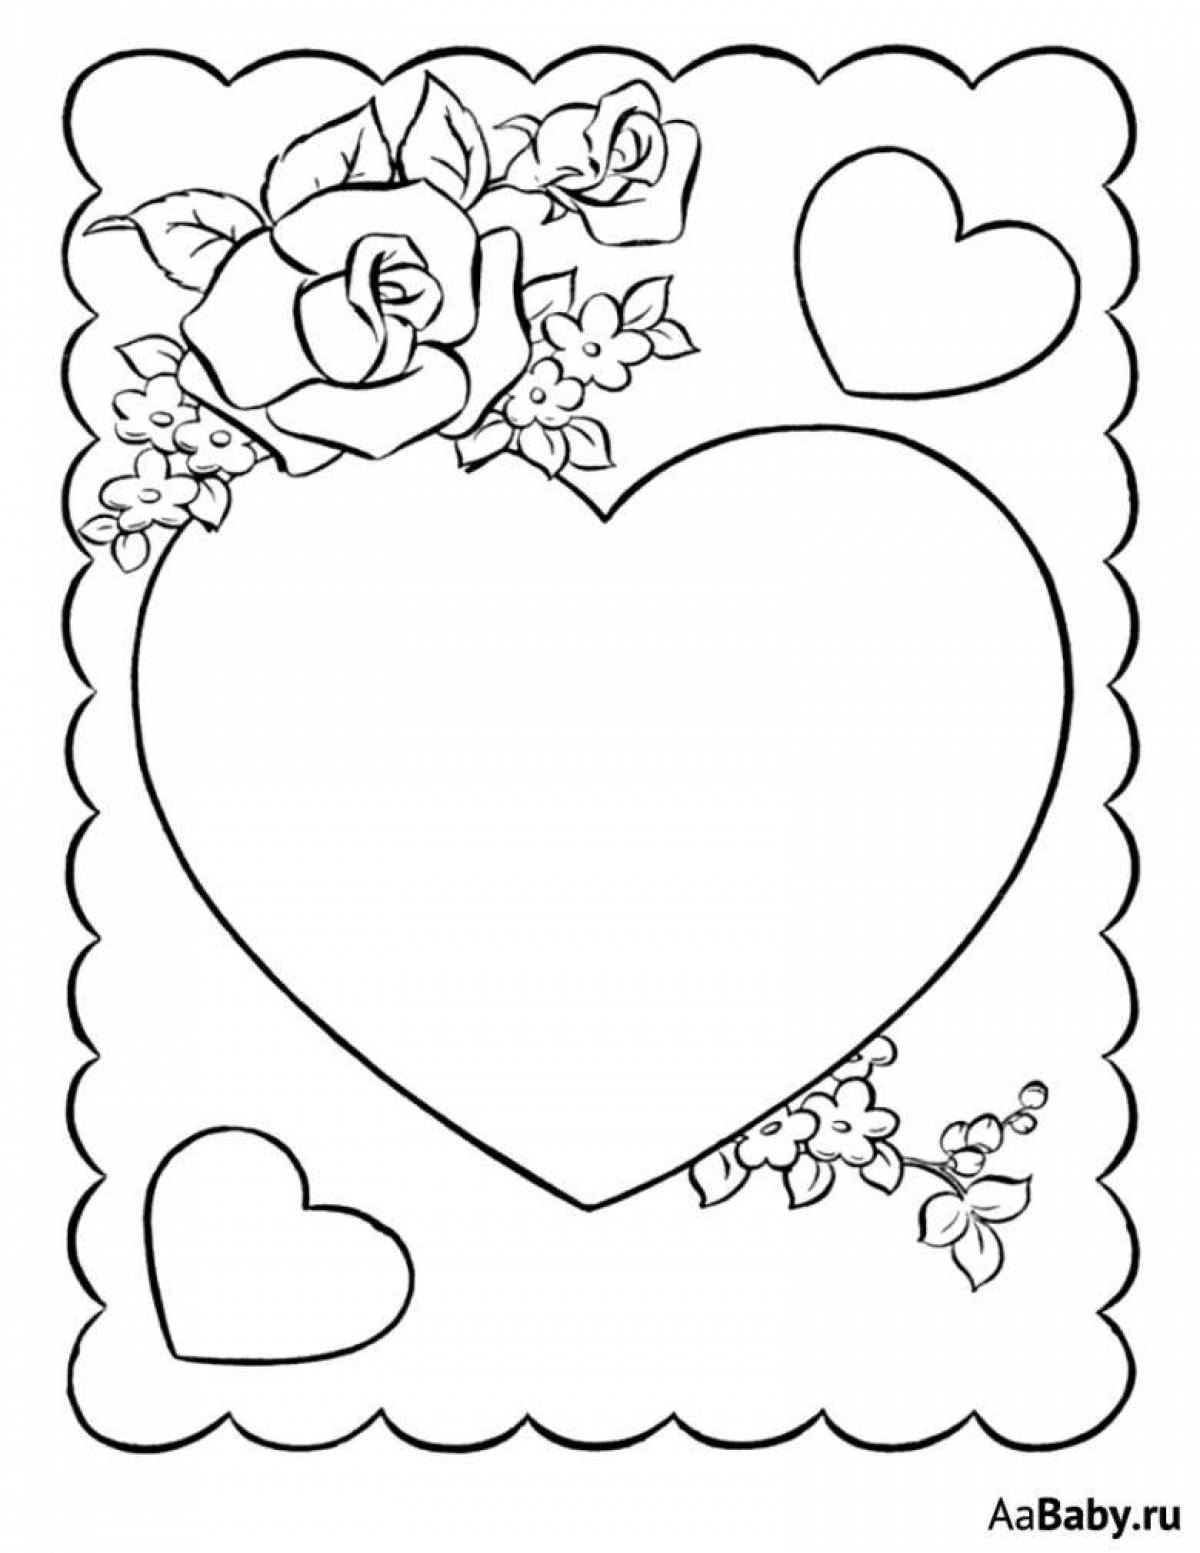 Colorful valentine's day coloring book for kids